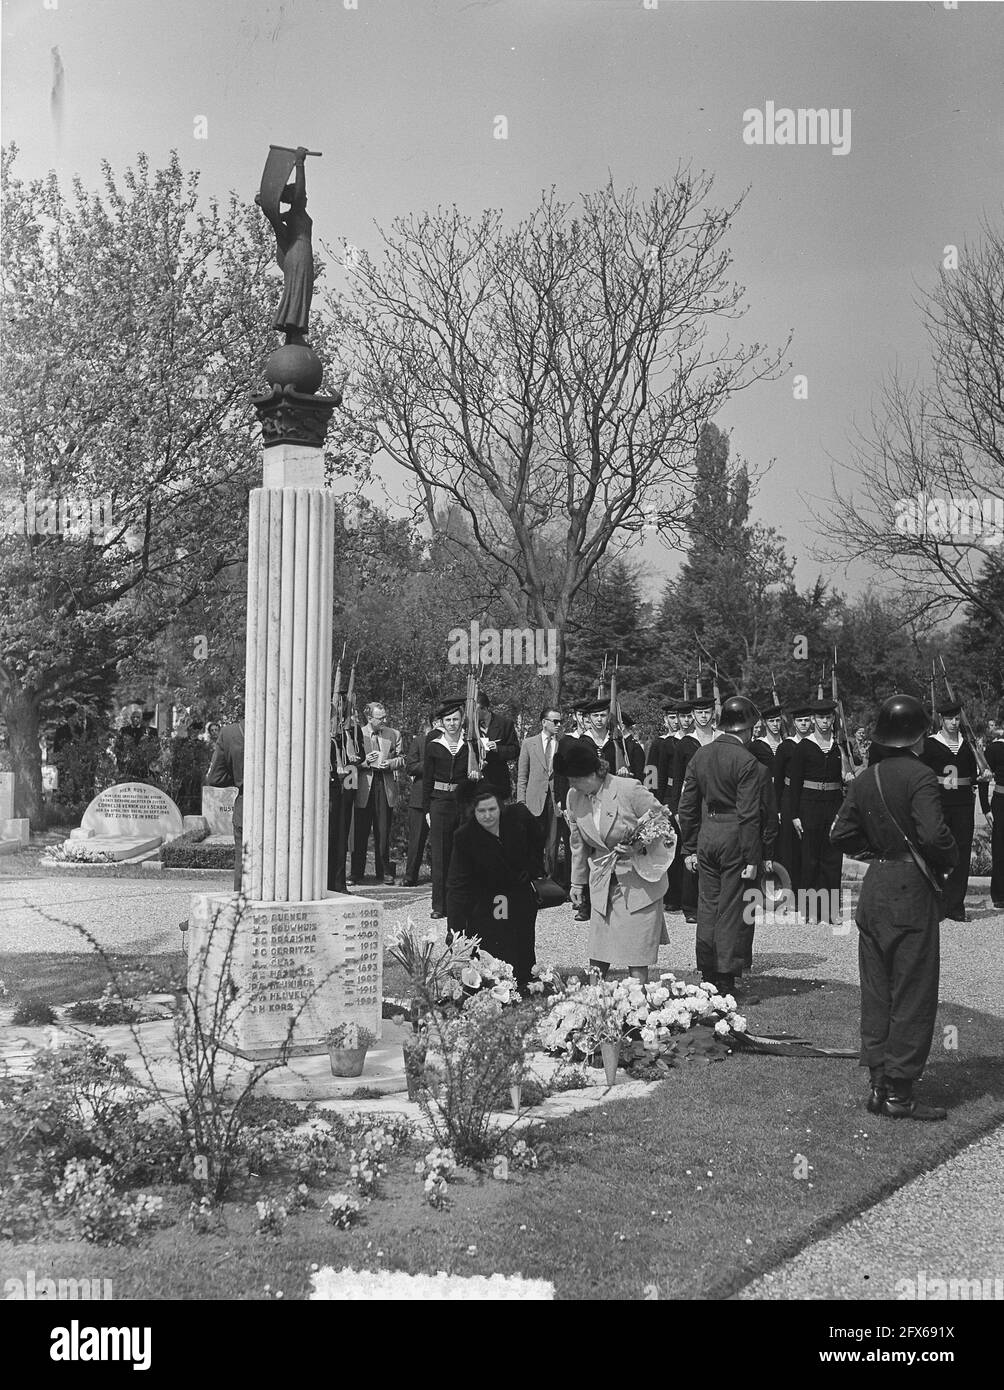 Commemoration New Monarch Cemetery Fallen Second World War wreath by ladies, 3 May 1952, MEMORIALS, fallen, The Netherlands, 20th century press agency photo, news to remember, documentary, historic photography 1945-1990, visual stories, human history of the Twentieth Century, capturing moments in time Stock Photo